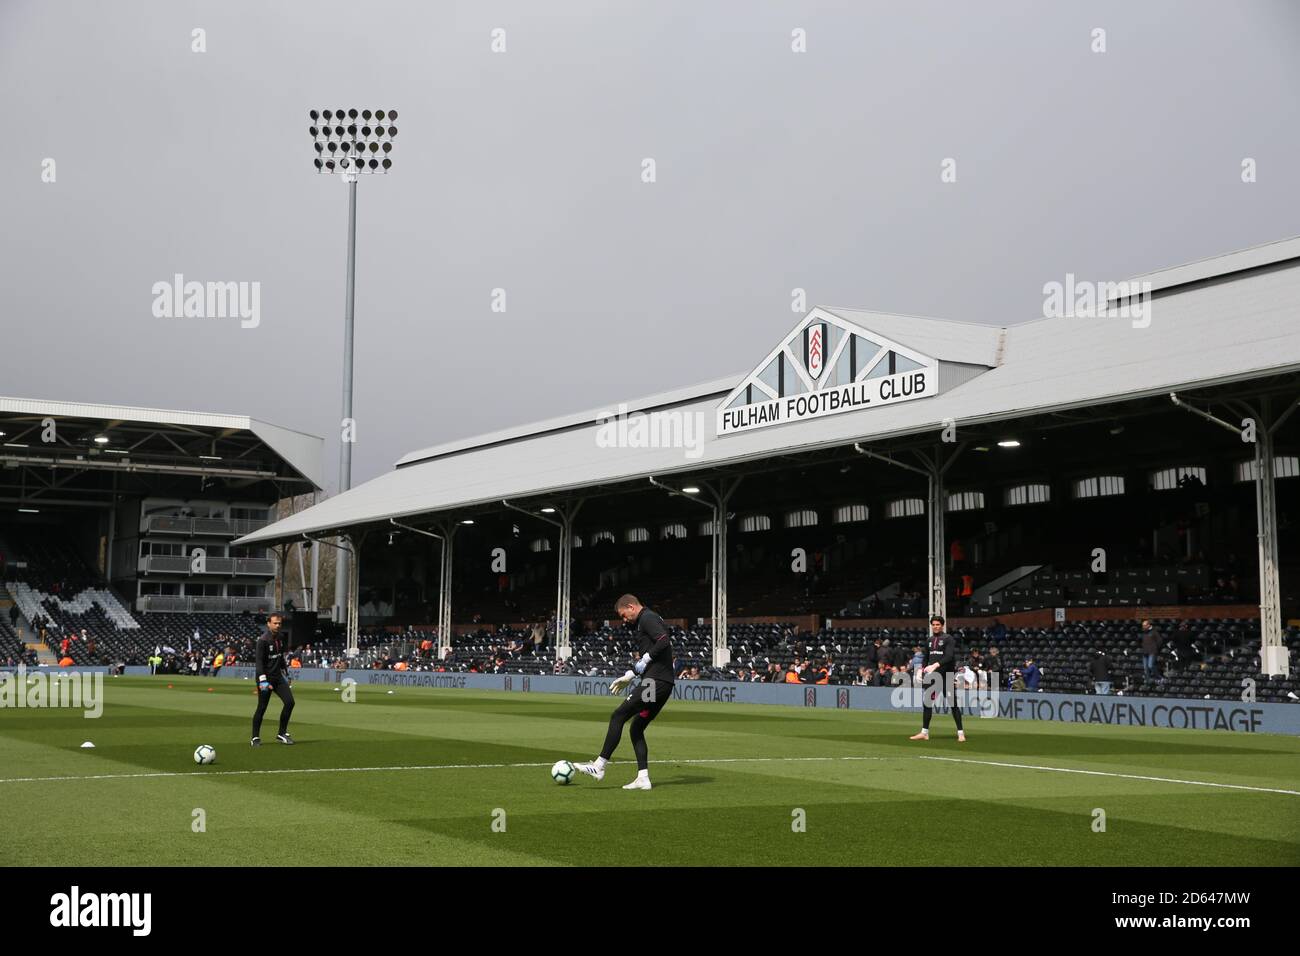 Everton players warm up at Craven Cottage ahead of Fulham and Everton's match Stock Photo